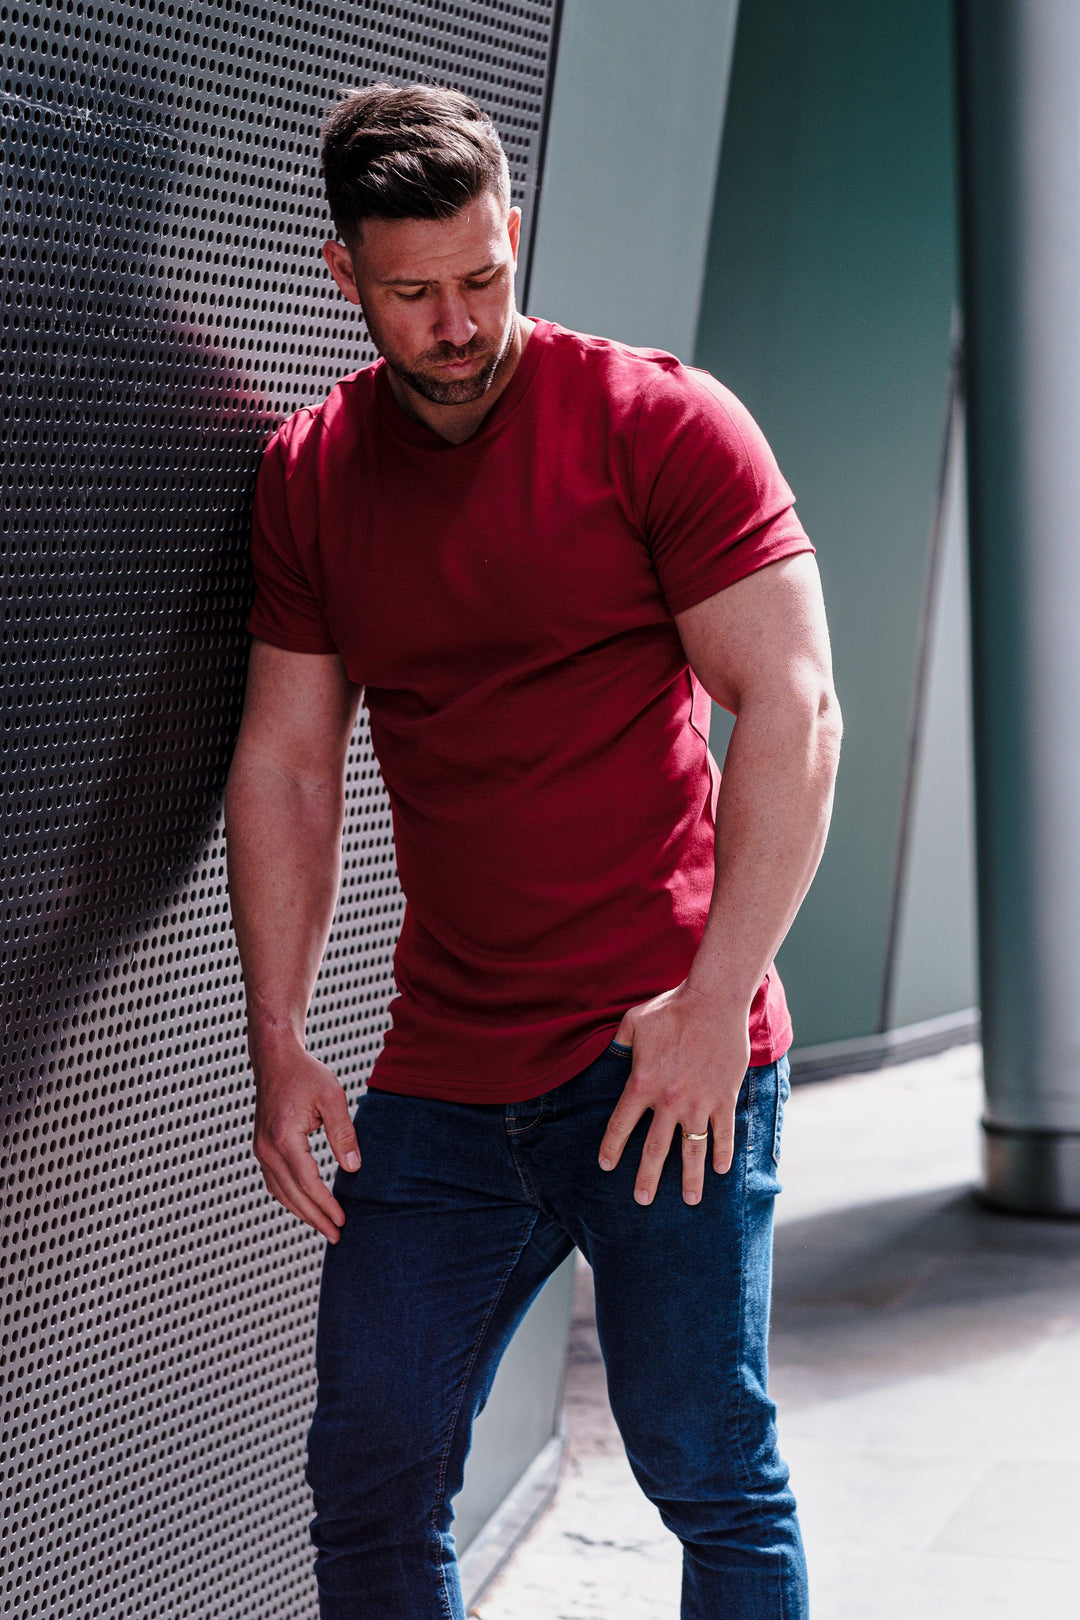 Burgundy Muscle Fit T Shirt. A Proportionally Fitted and Muscle Fit Tee in Burgundy. Ideal for bodybuilders.